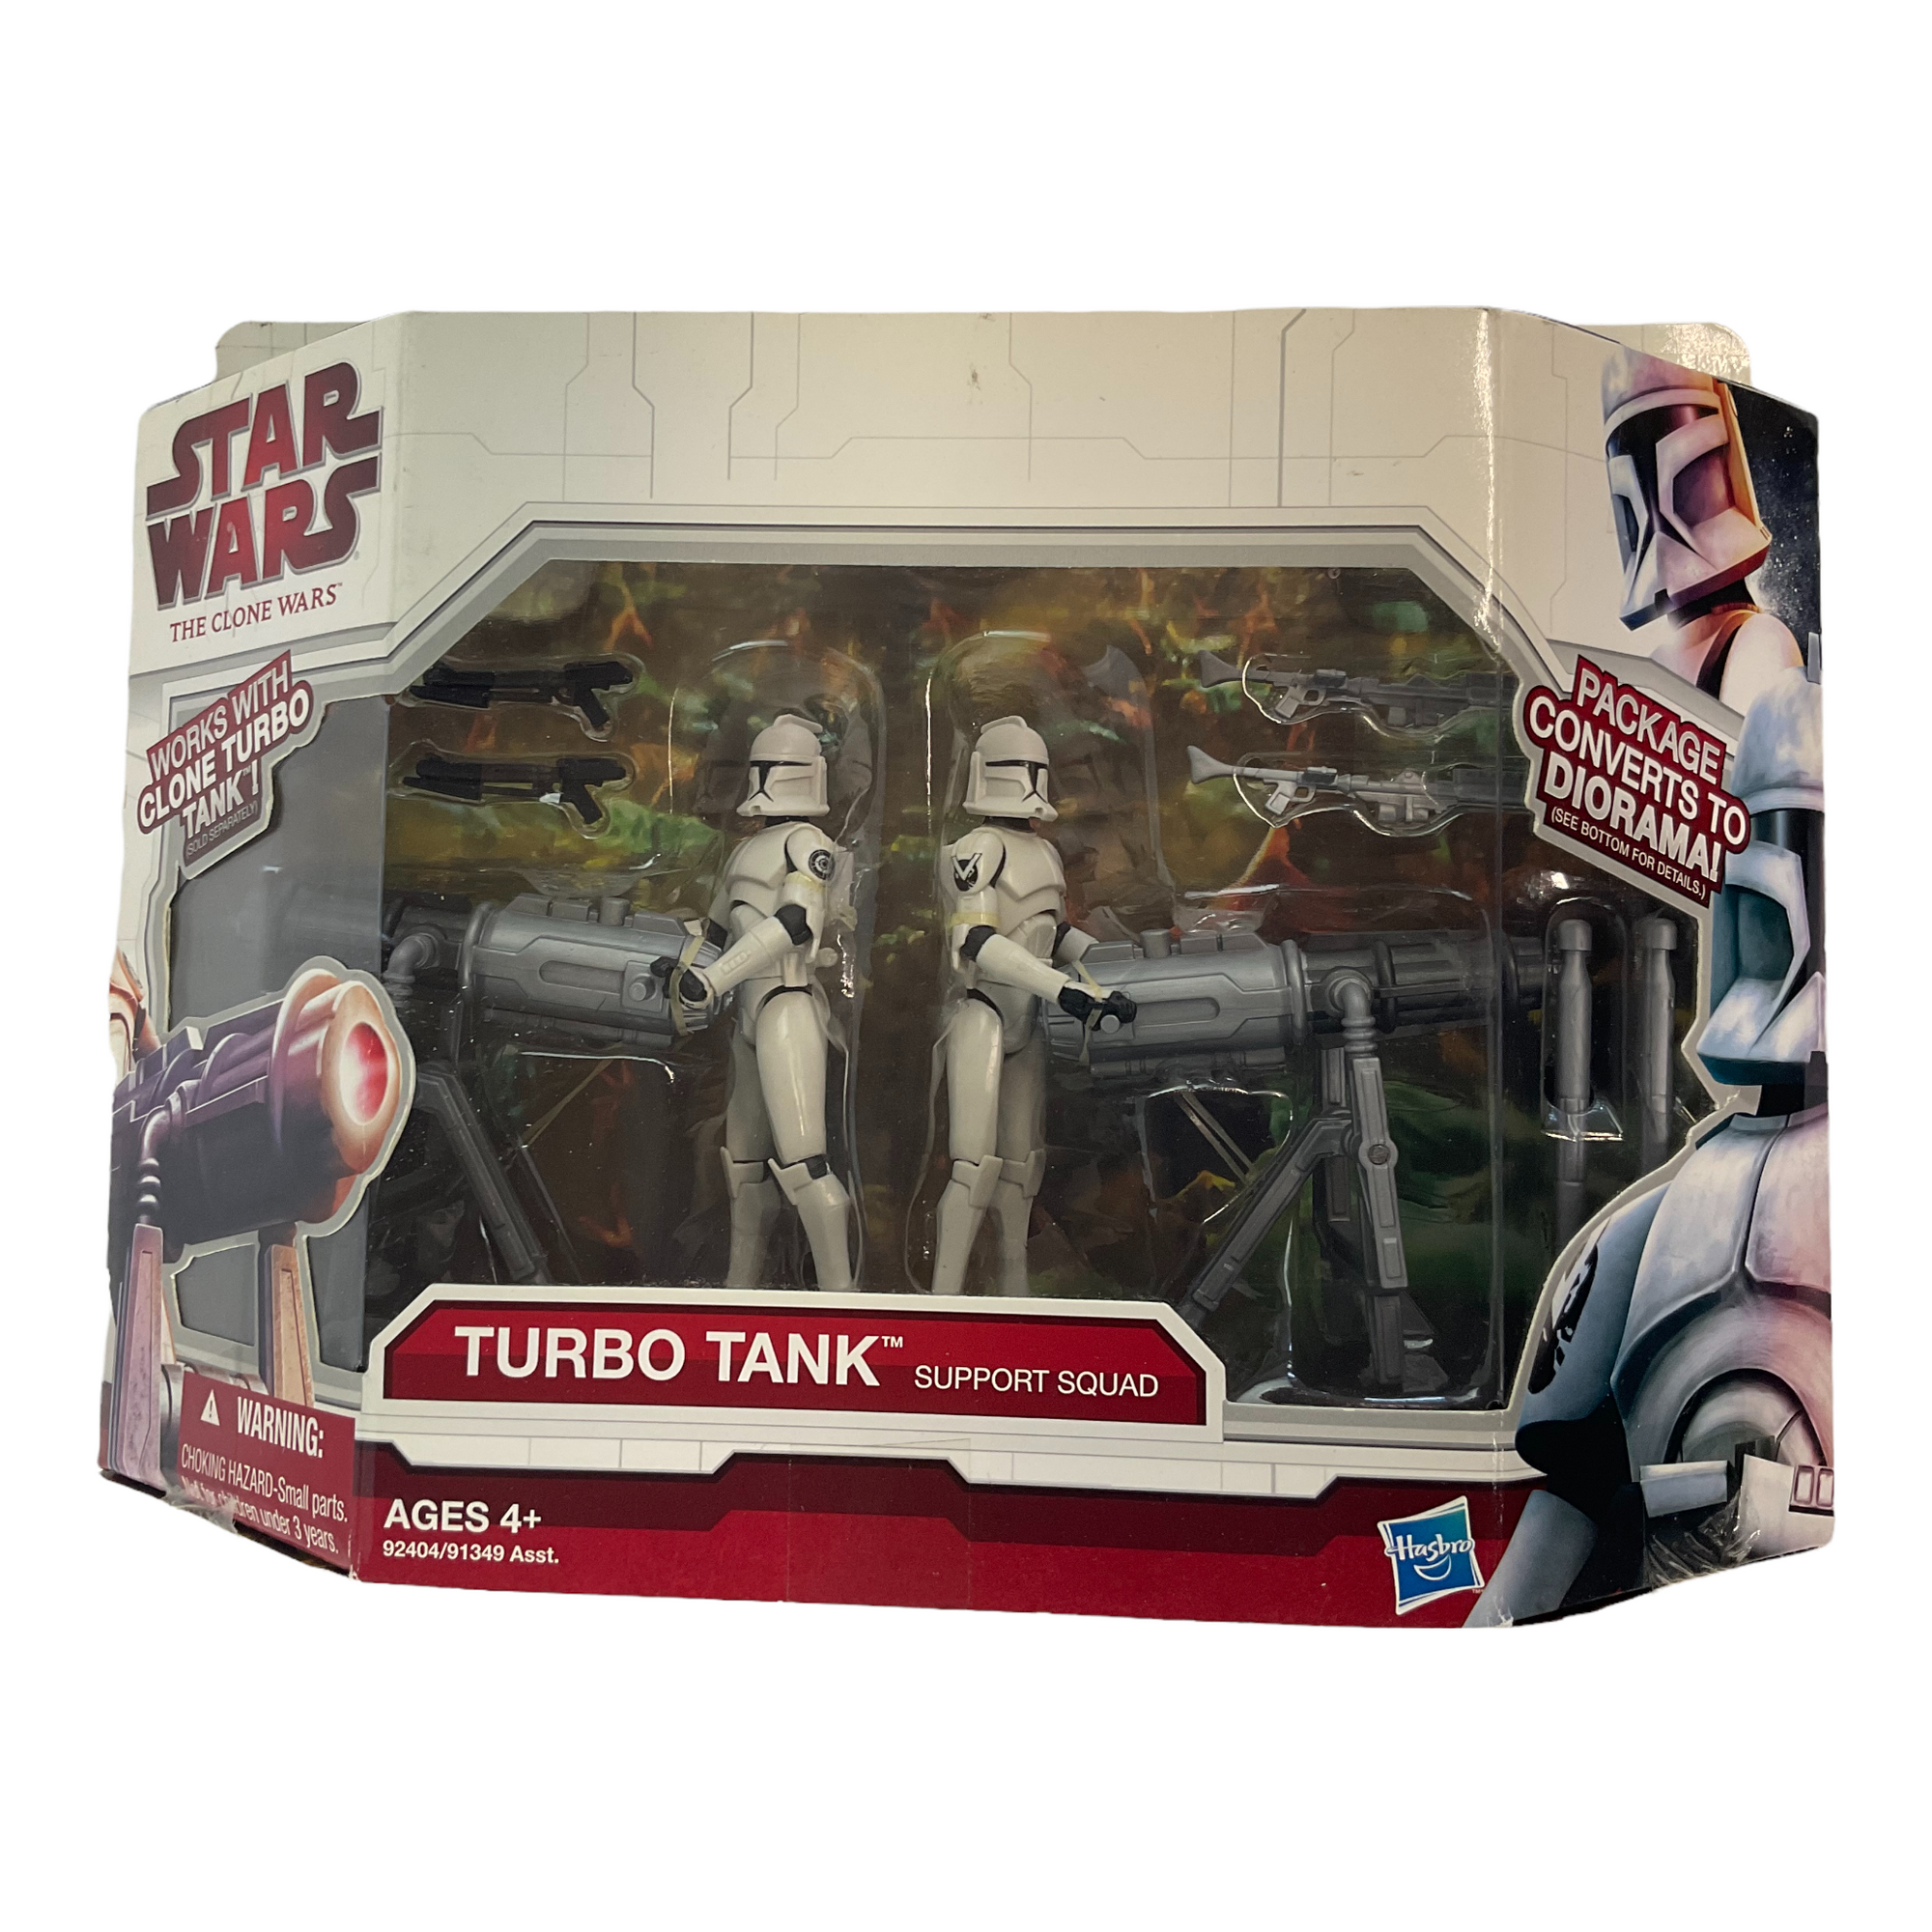 Star Wars The Clone Wars: Turbo Tank Support Squad Figures